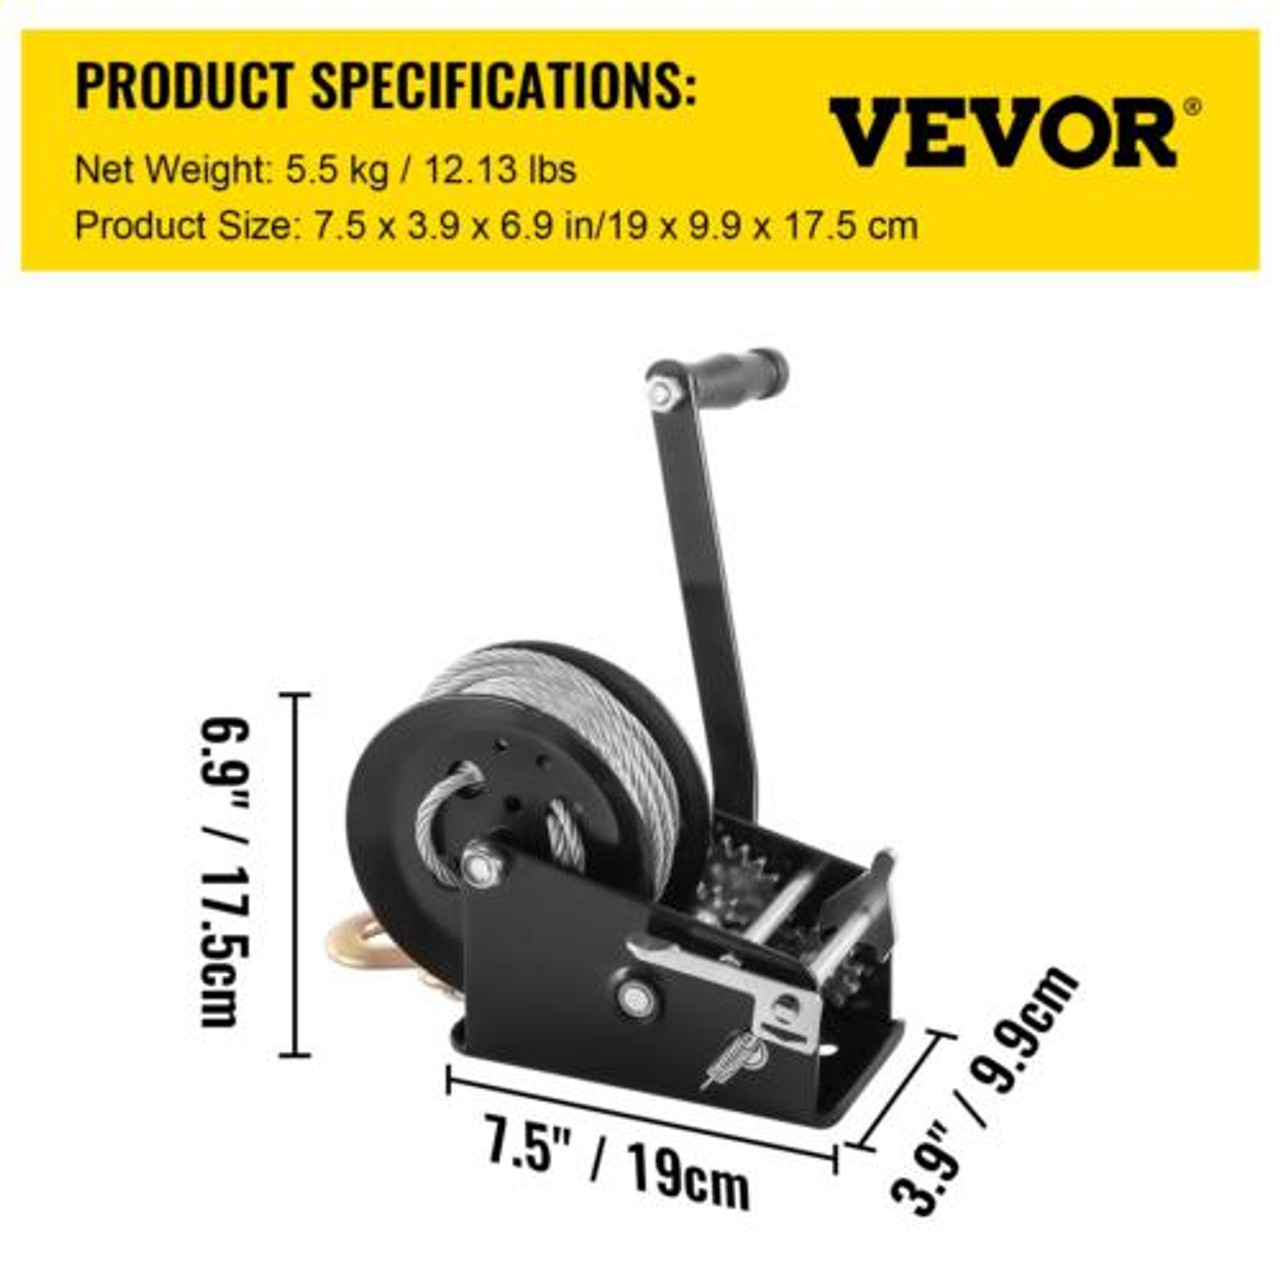 VEVOR Rope Crank, 3500 LBS Capacity Heavy Duty Hand Winch with 10 m(32.8 ft) Wir